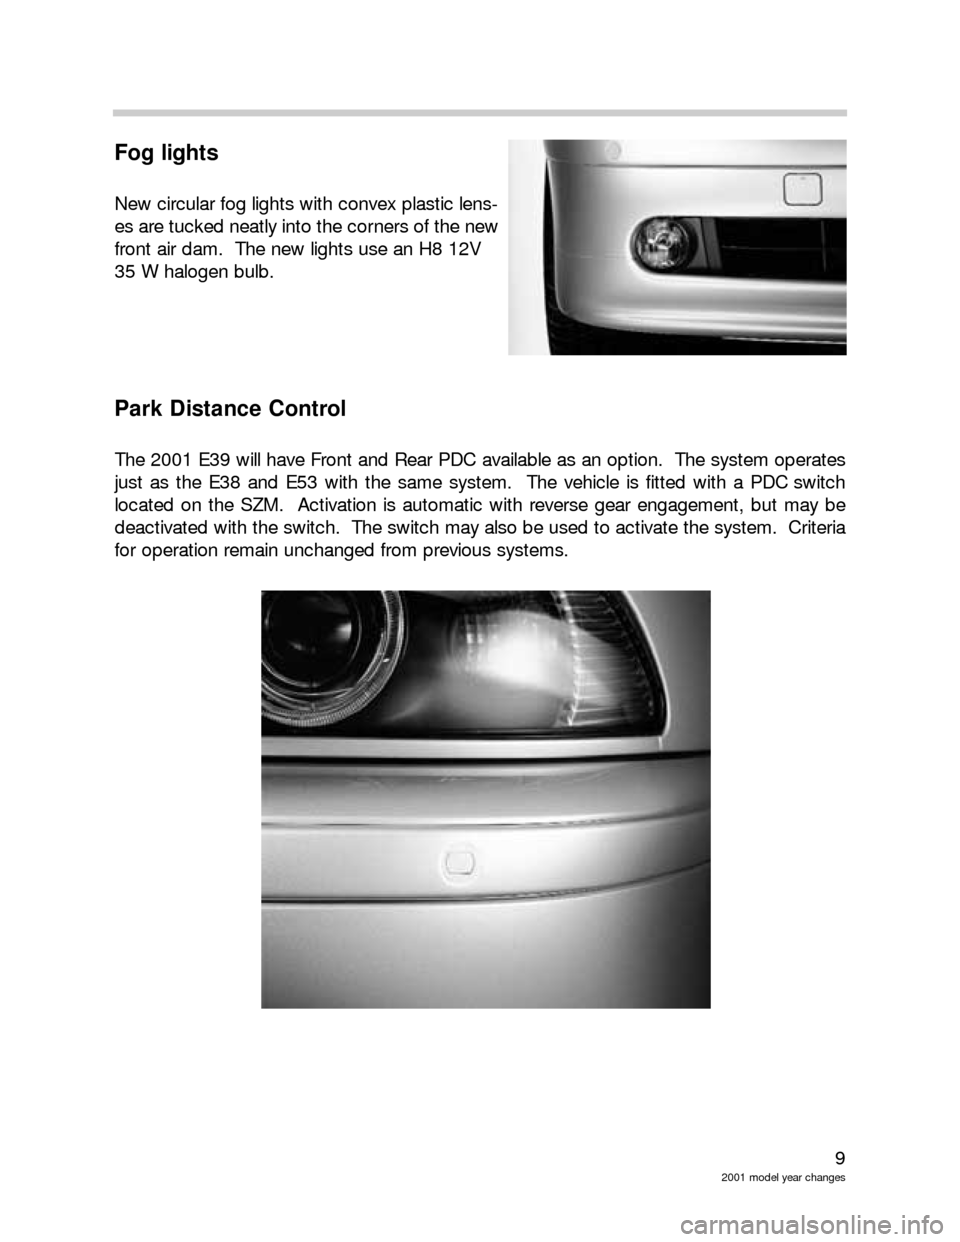 BMW 3 SERIES 2005 E46 Model Yar Changes 9
2001 model year changes
Fog lights
New circular fog lights with convex plastic lens-
es are tucked neatly into the corners of the new
front air dam.  The new lights use an H8 12V 
35 W halogen bulb.